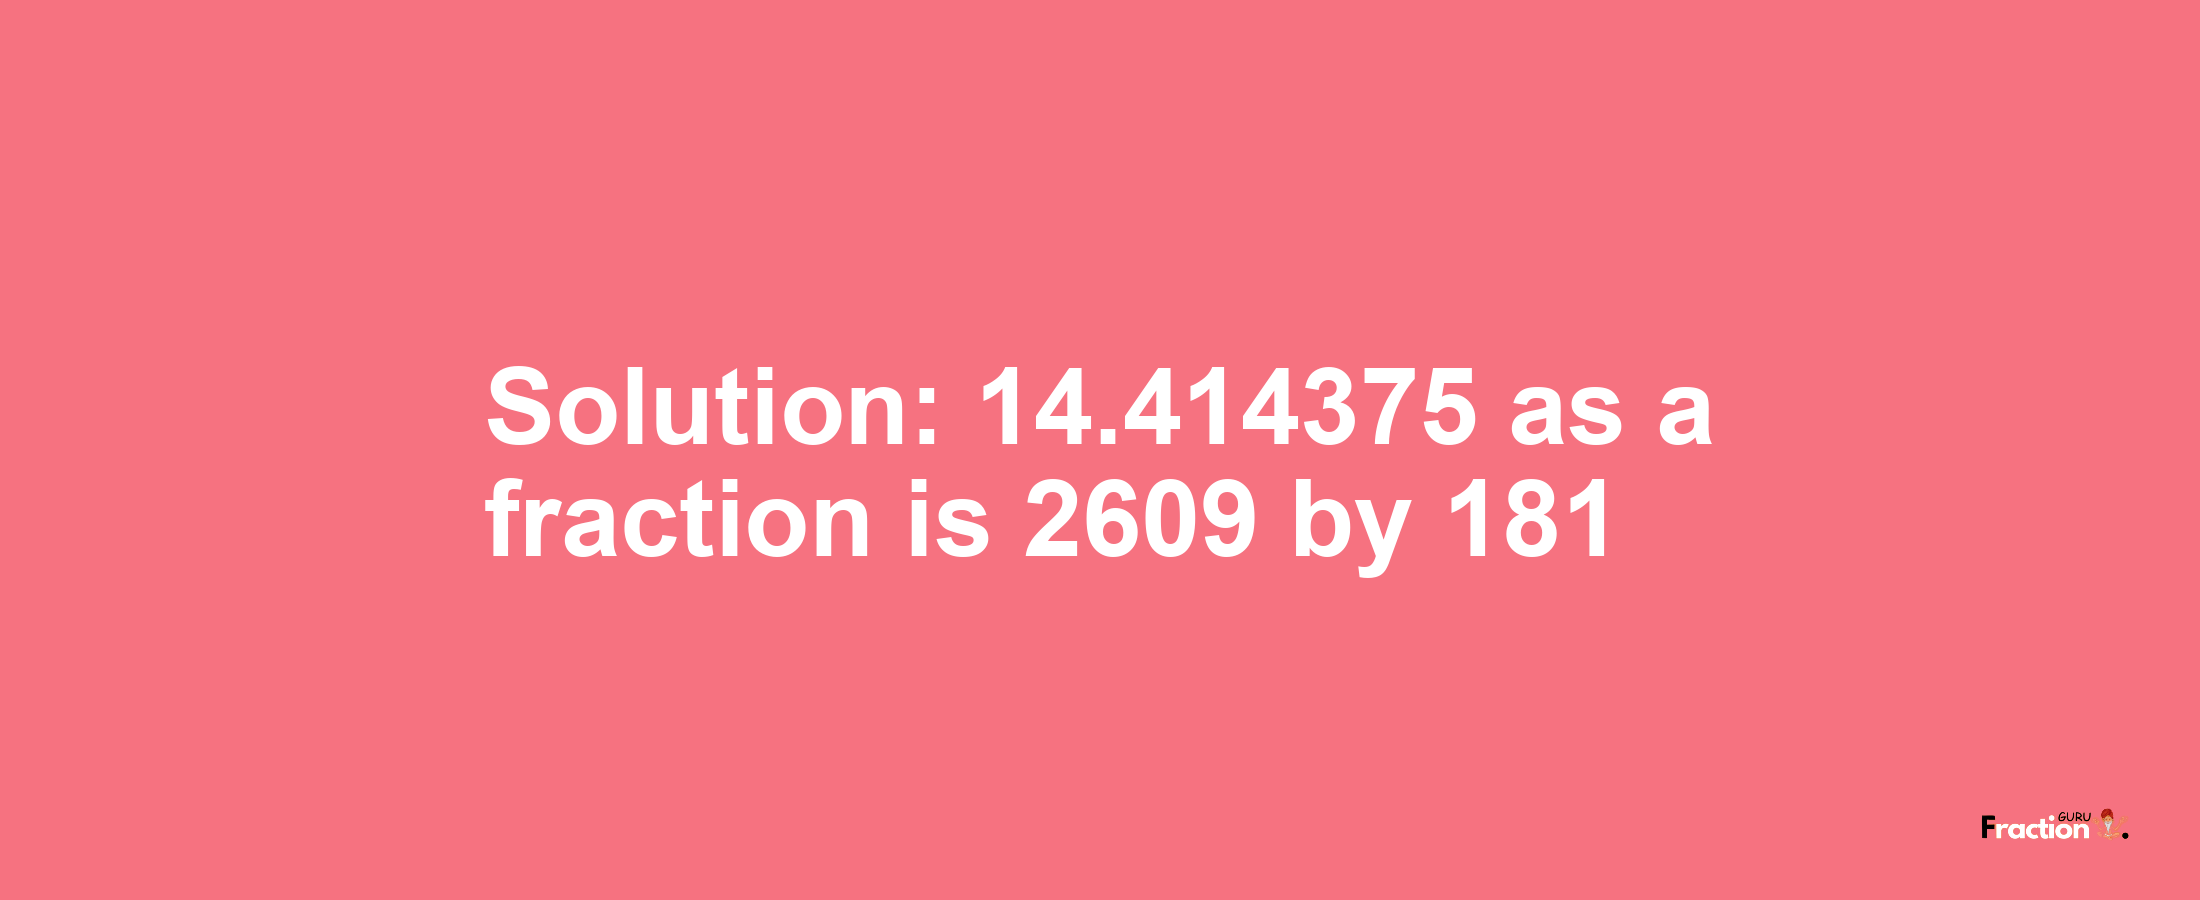 Solution:14.414375 as a fraction is 2609/181